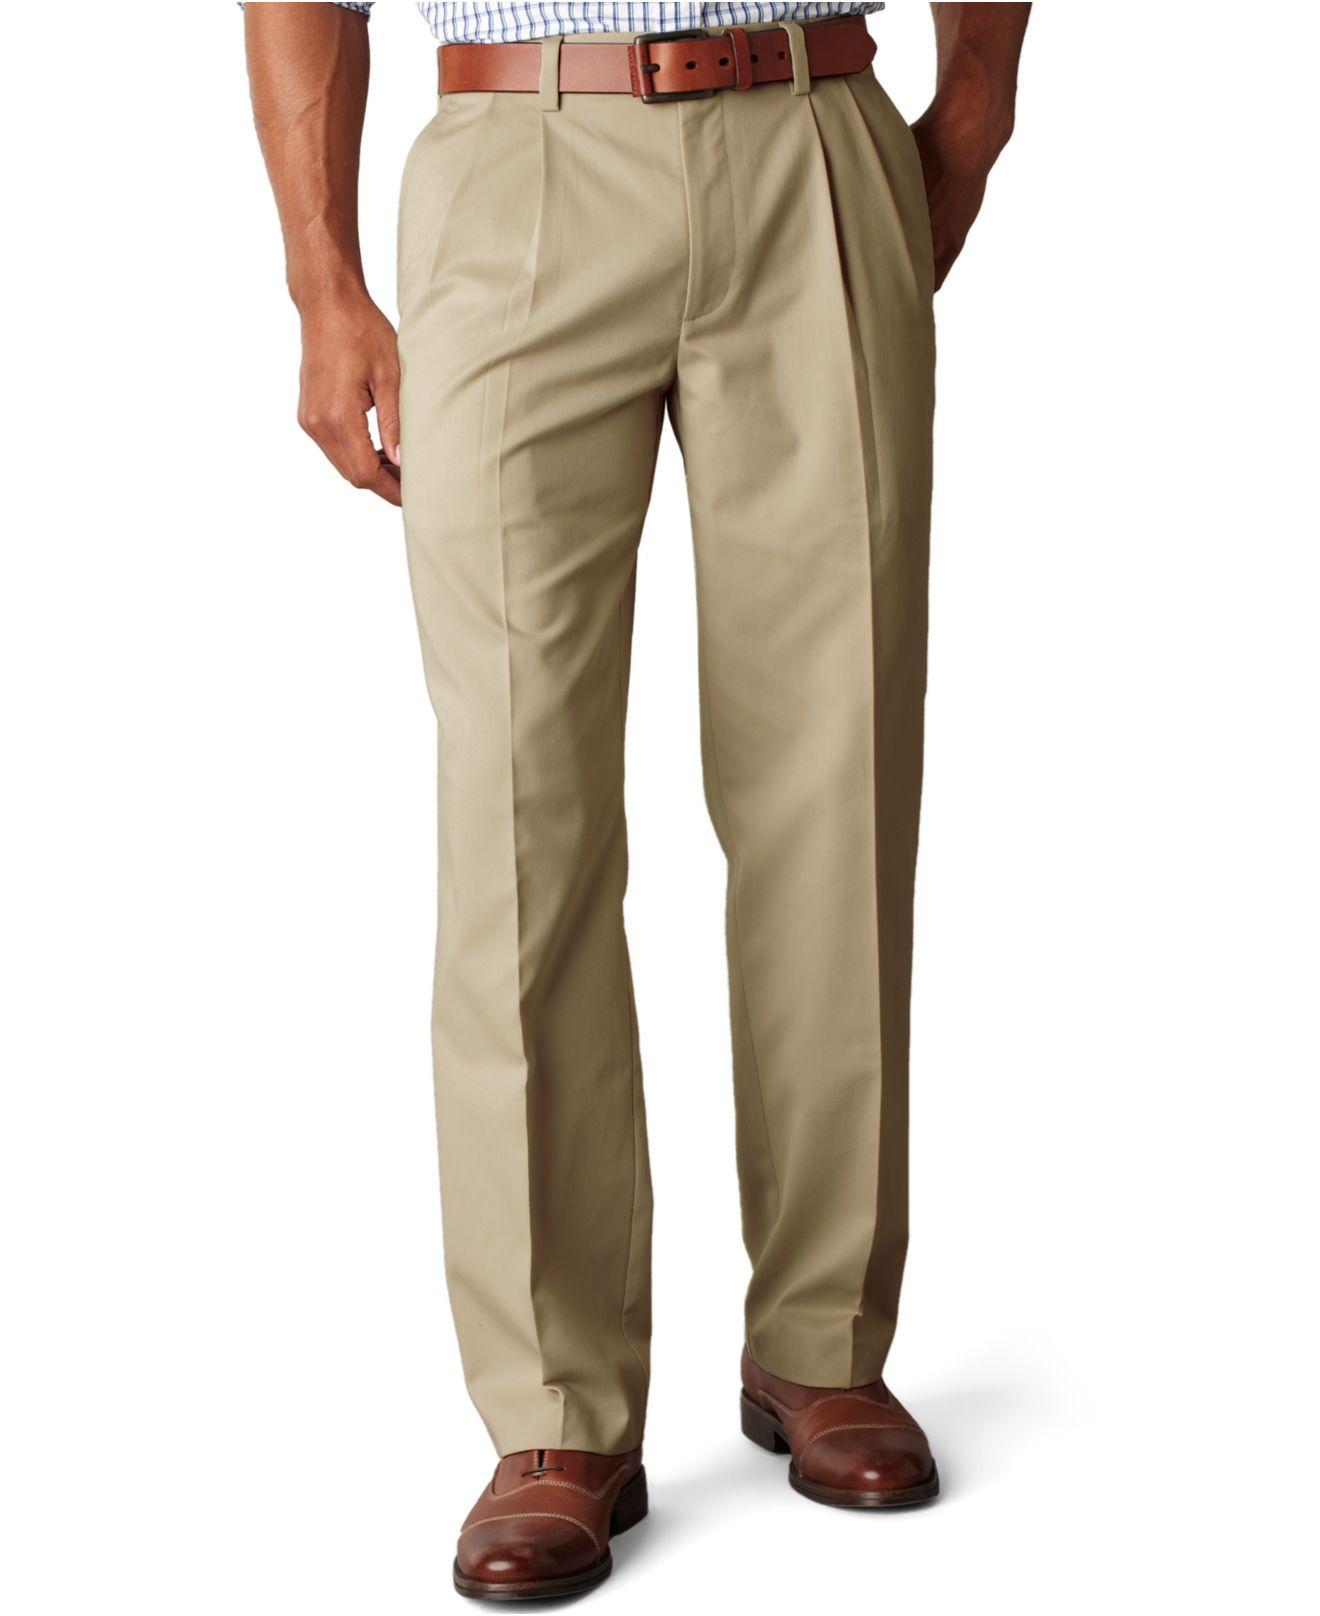 Lyst - Dockers Big And Tall Easy Khaki Pleated Pants in Natural for Men